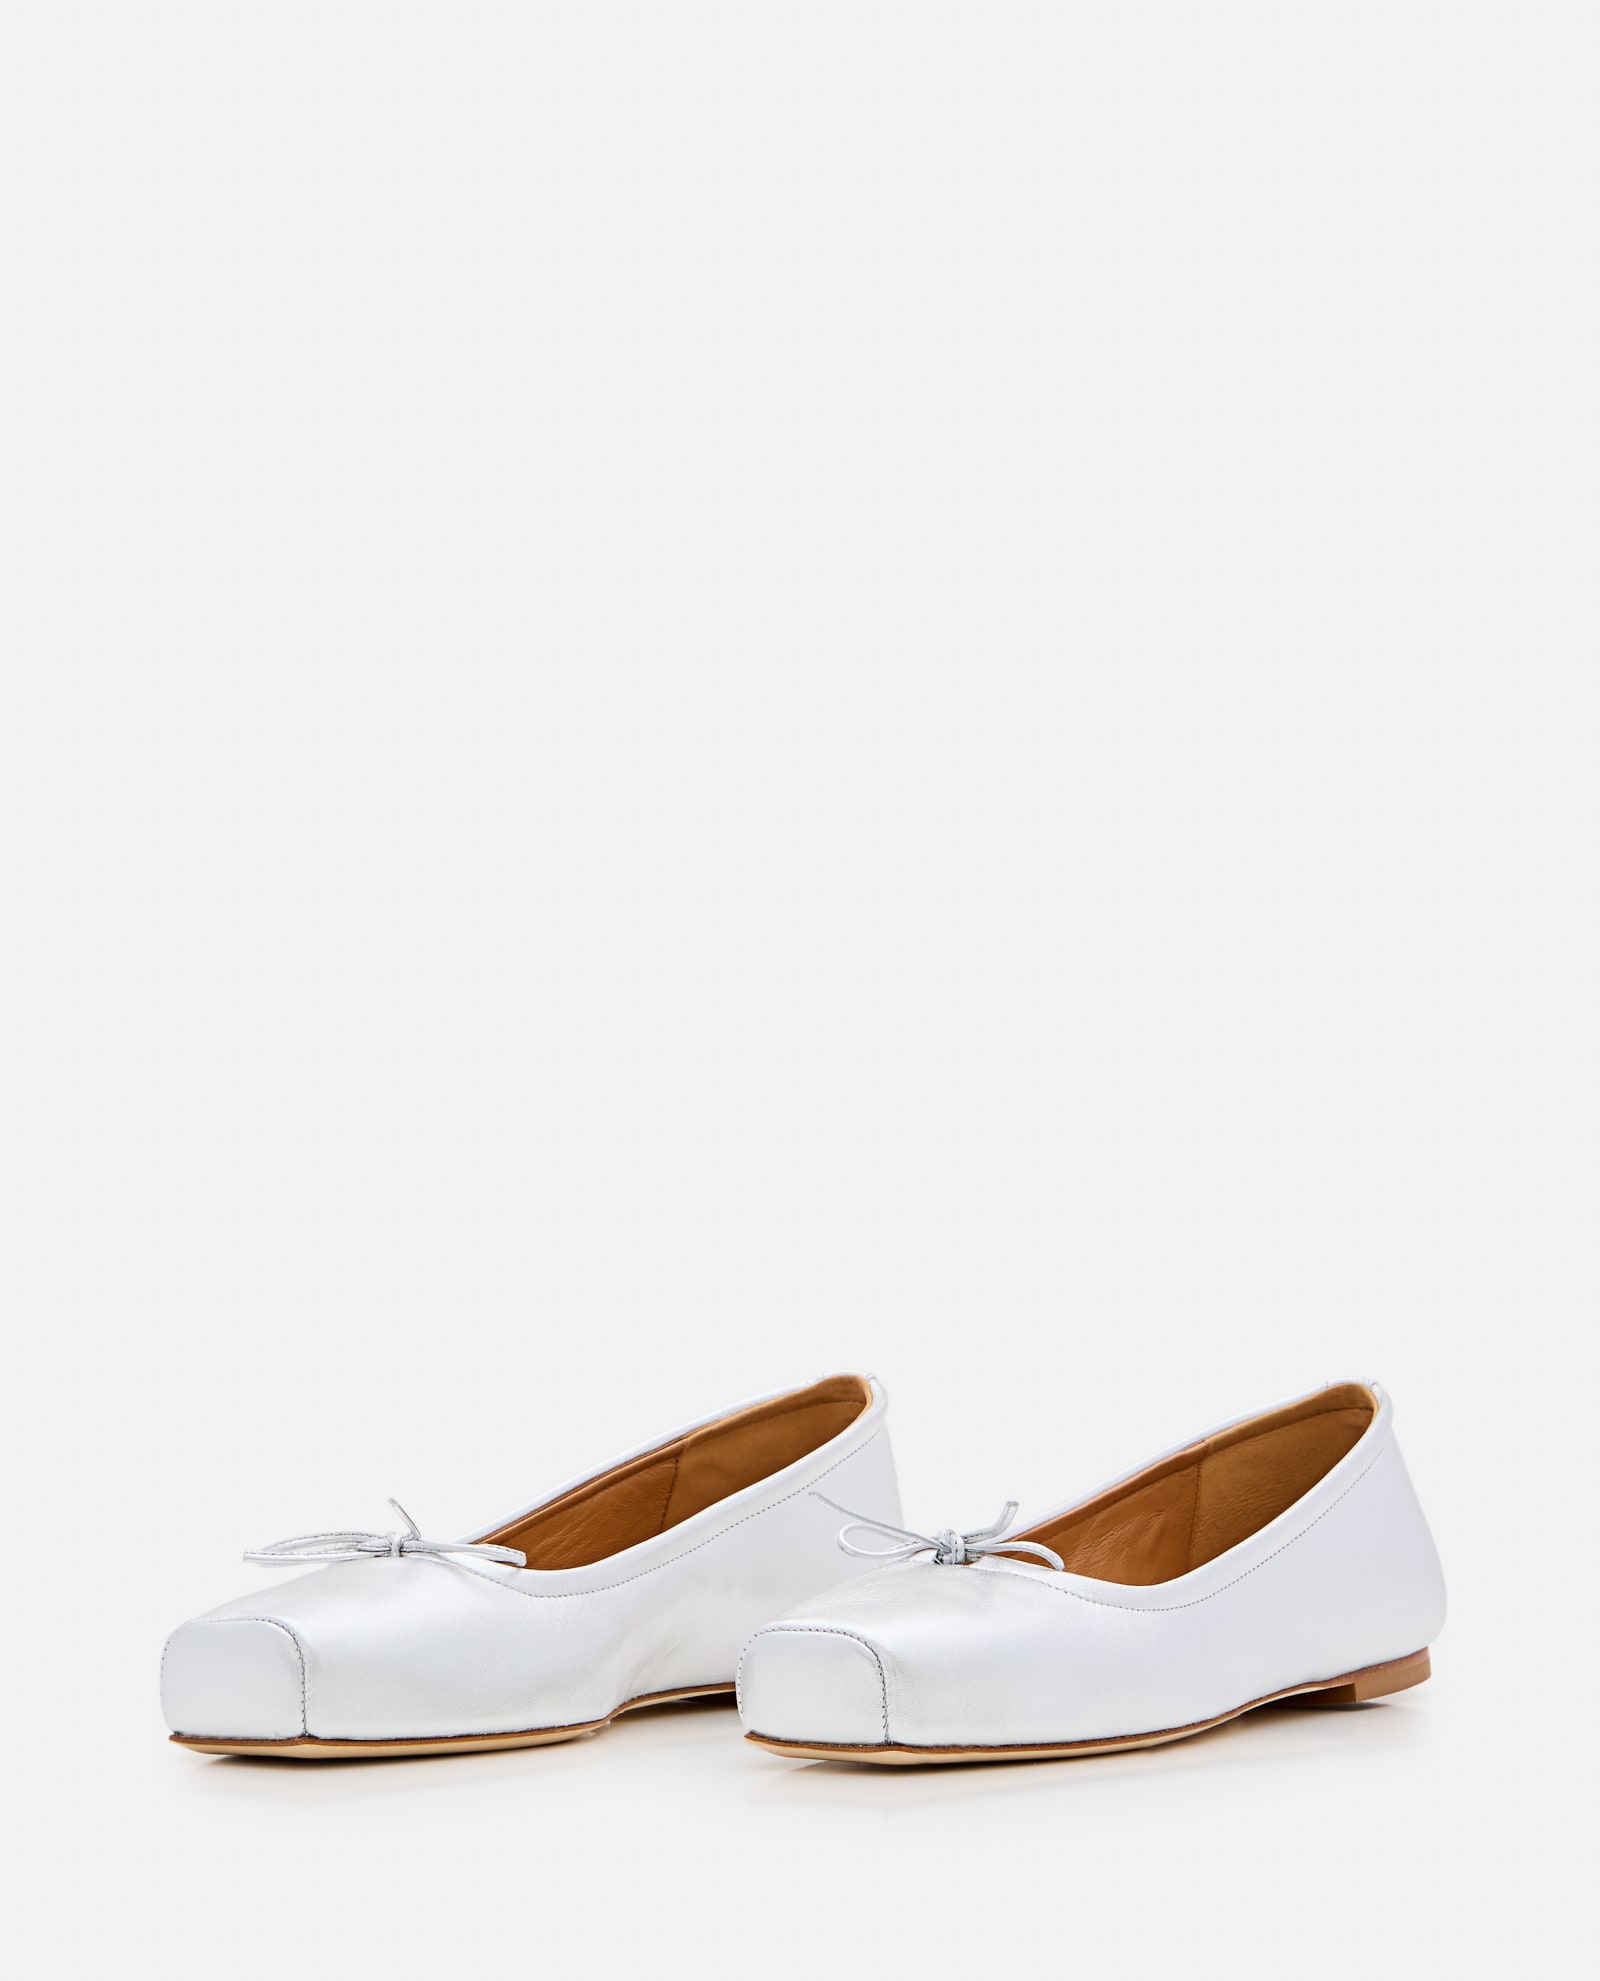 Shop Aeyde Gabriella Laminated Nappa Leather Ballet Flat In Silver